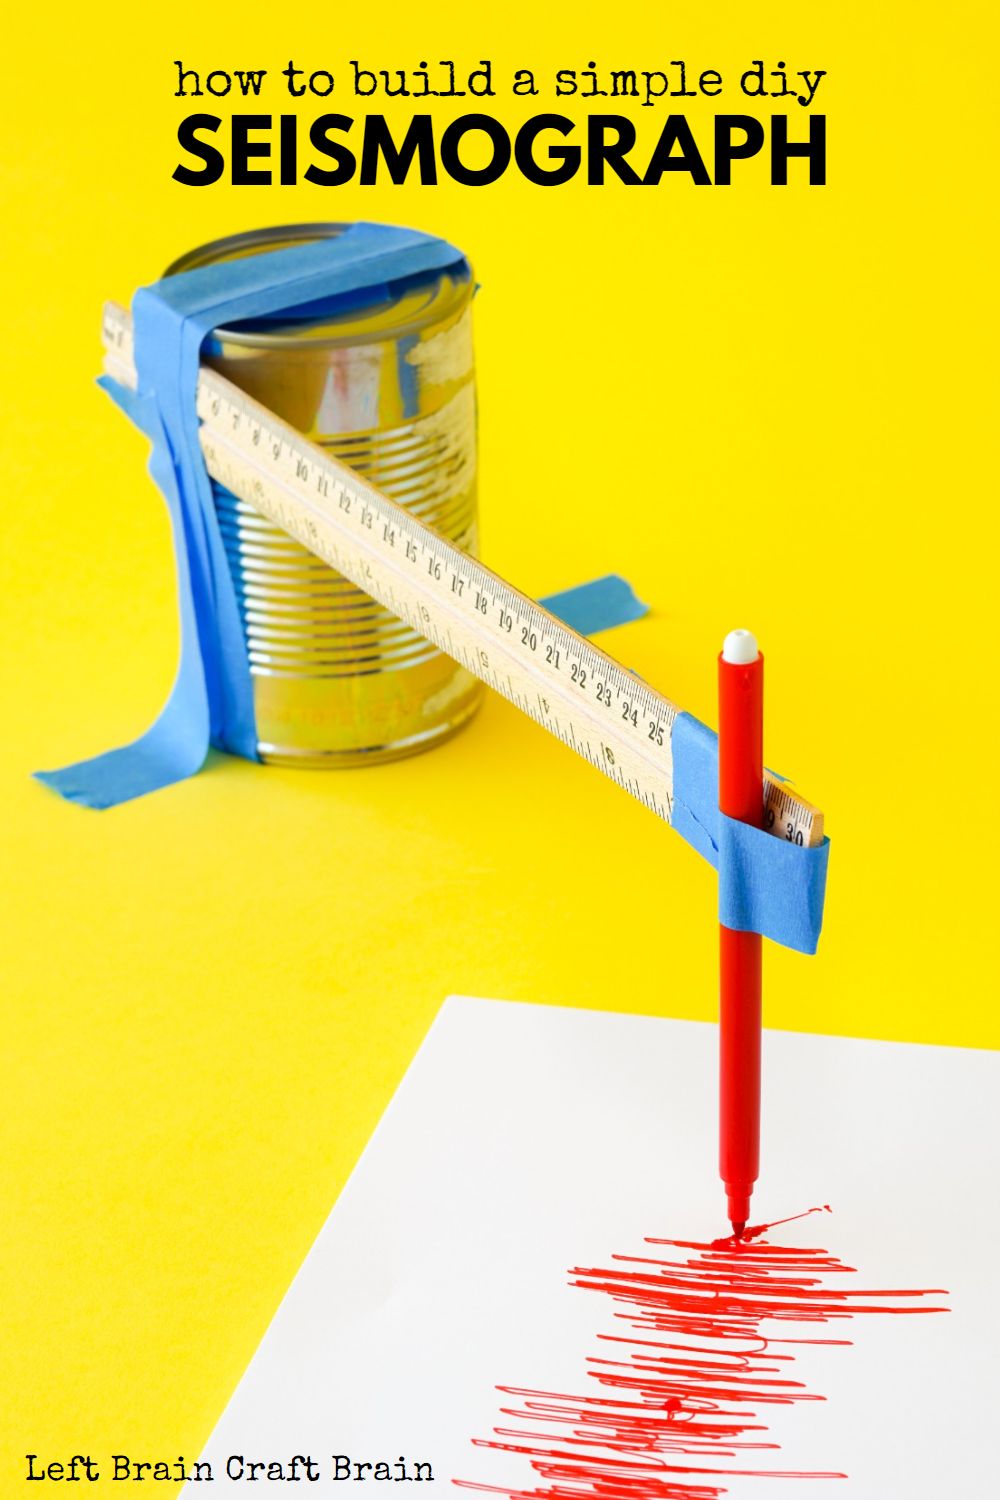 Build a DIY seismograph to learn about earthquakes and how they are measured. This simple STEM project teaches the science behind world events.